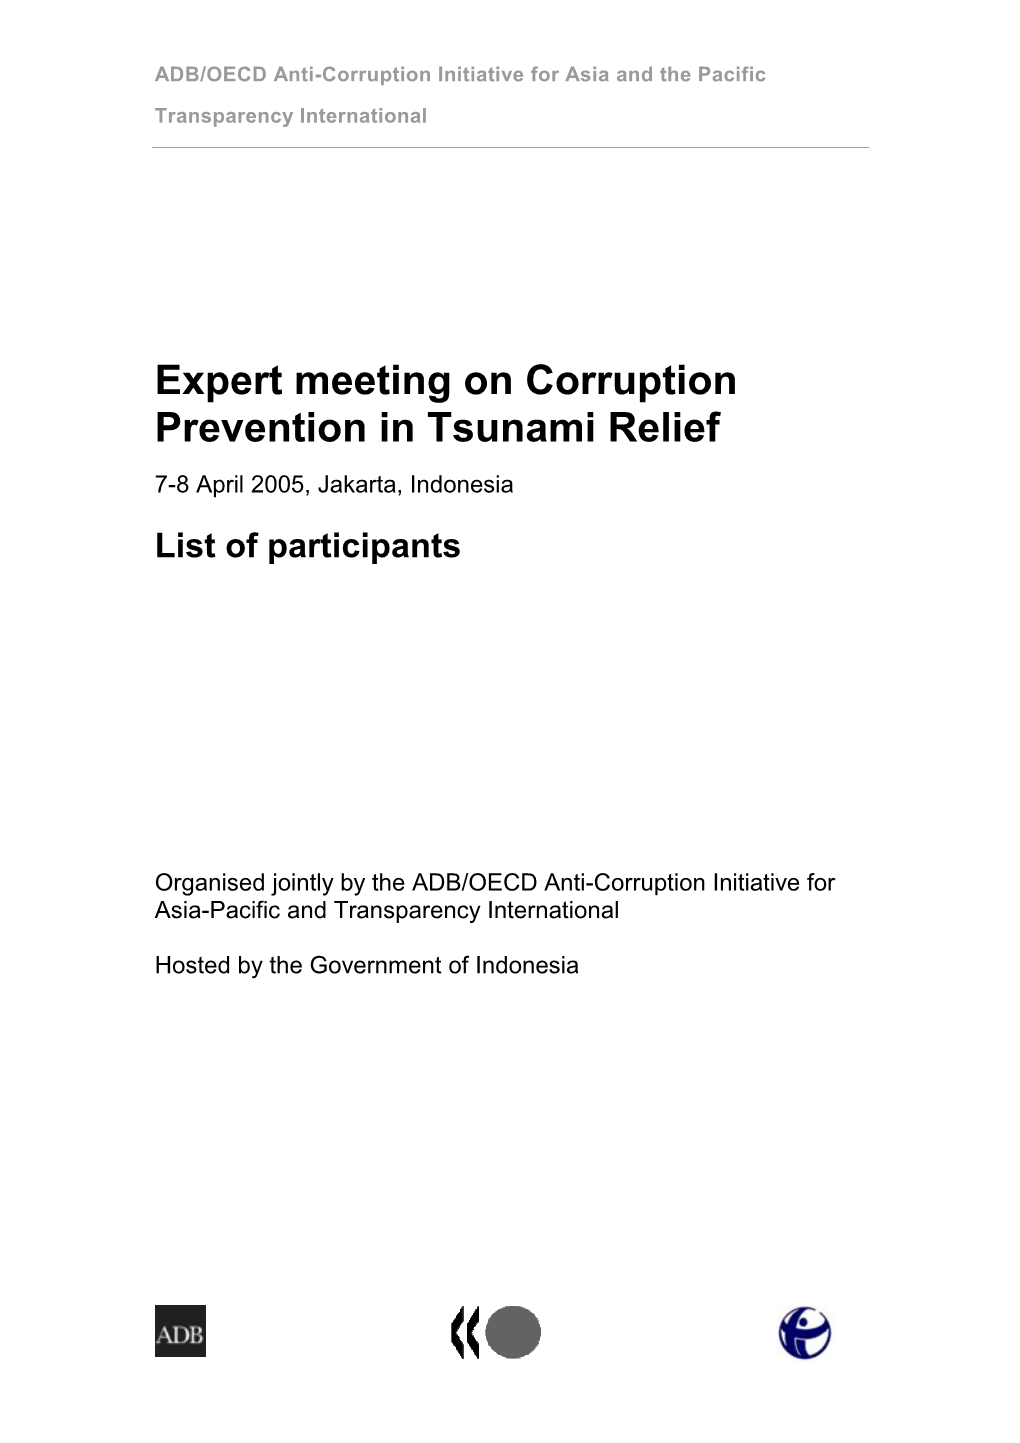 Expert Meeting on Corruption Prevention in Tsunami Relief